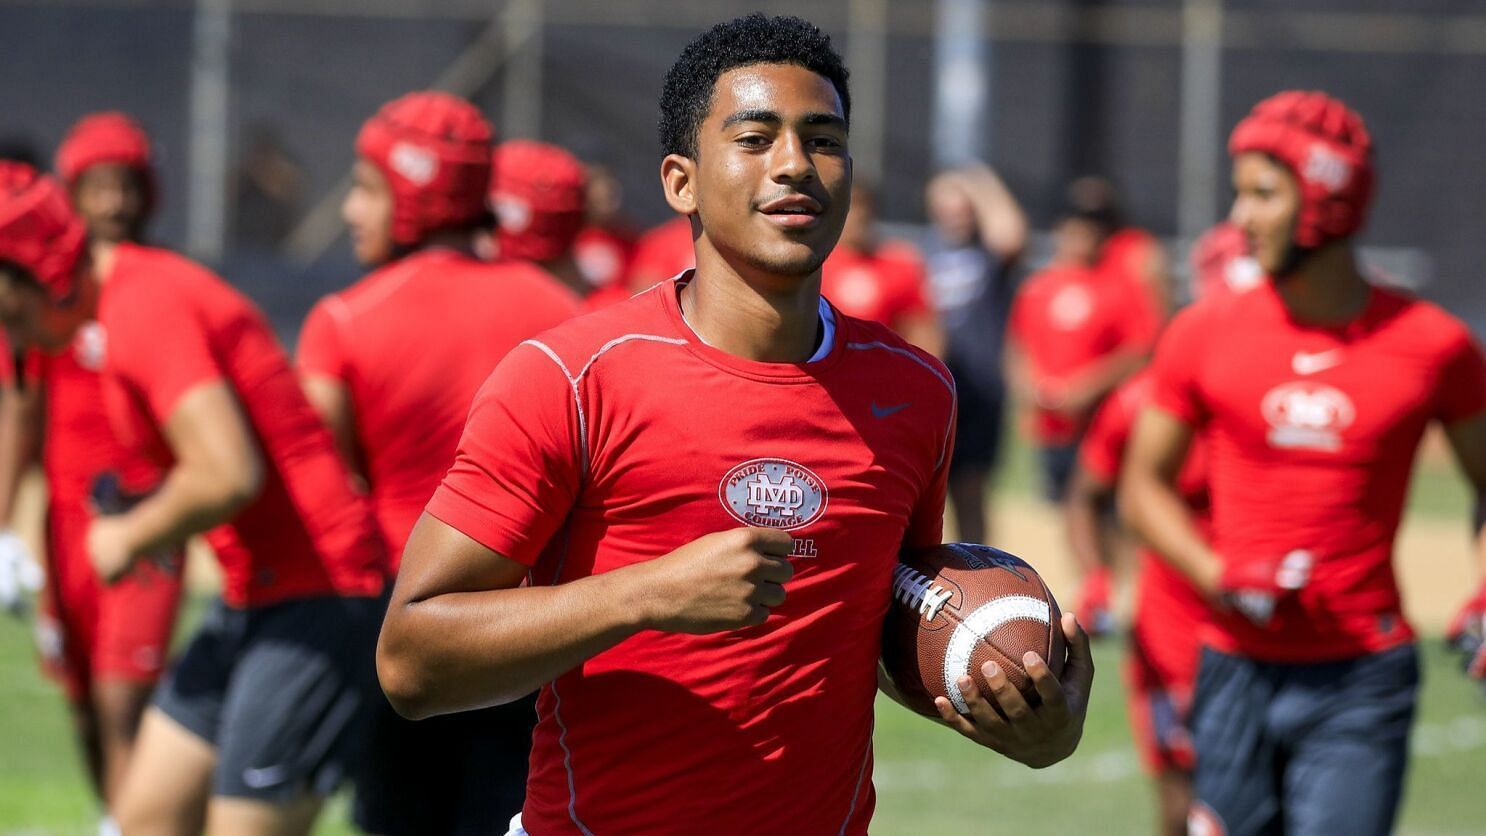 Bryce Young at Mater Dei High School